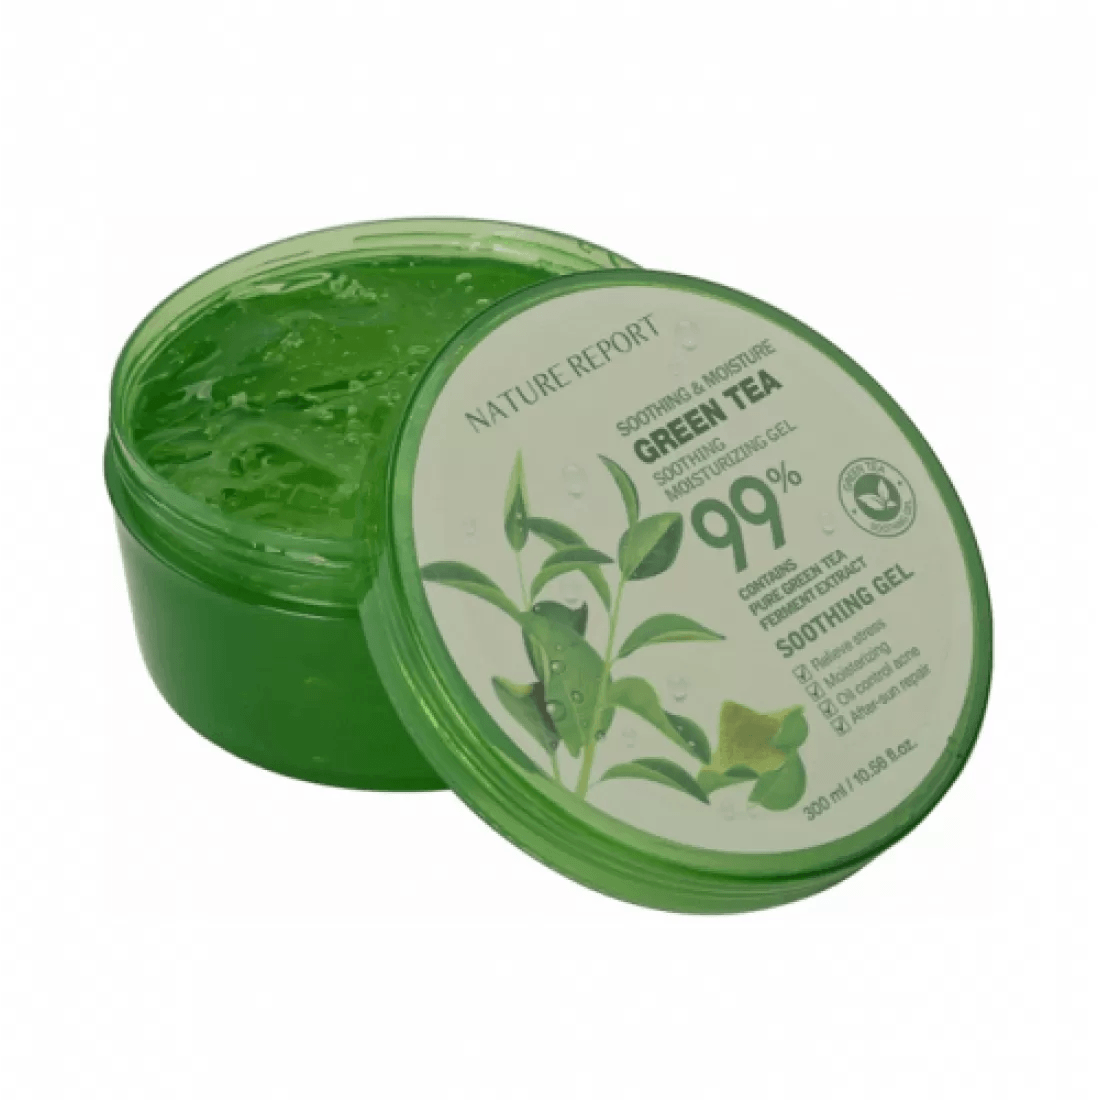 Nature Report Green Tea Soothing Gel 99% 300Ml - IZZAT DAOUK SA